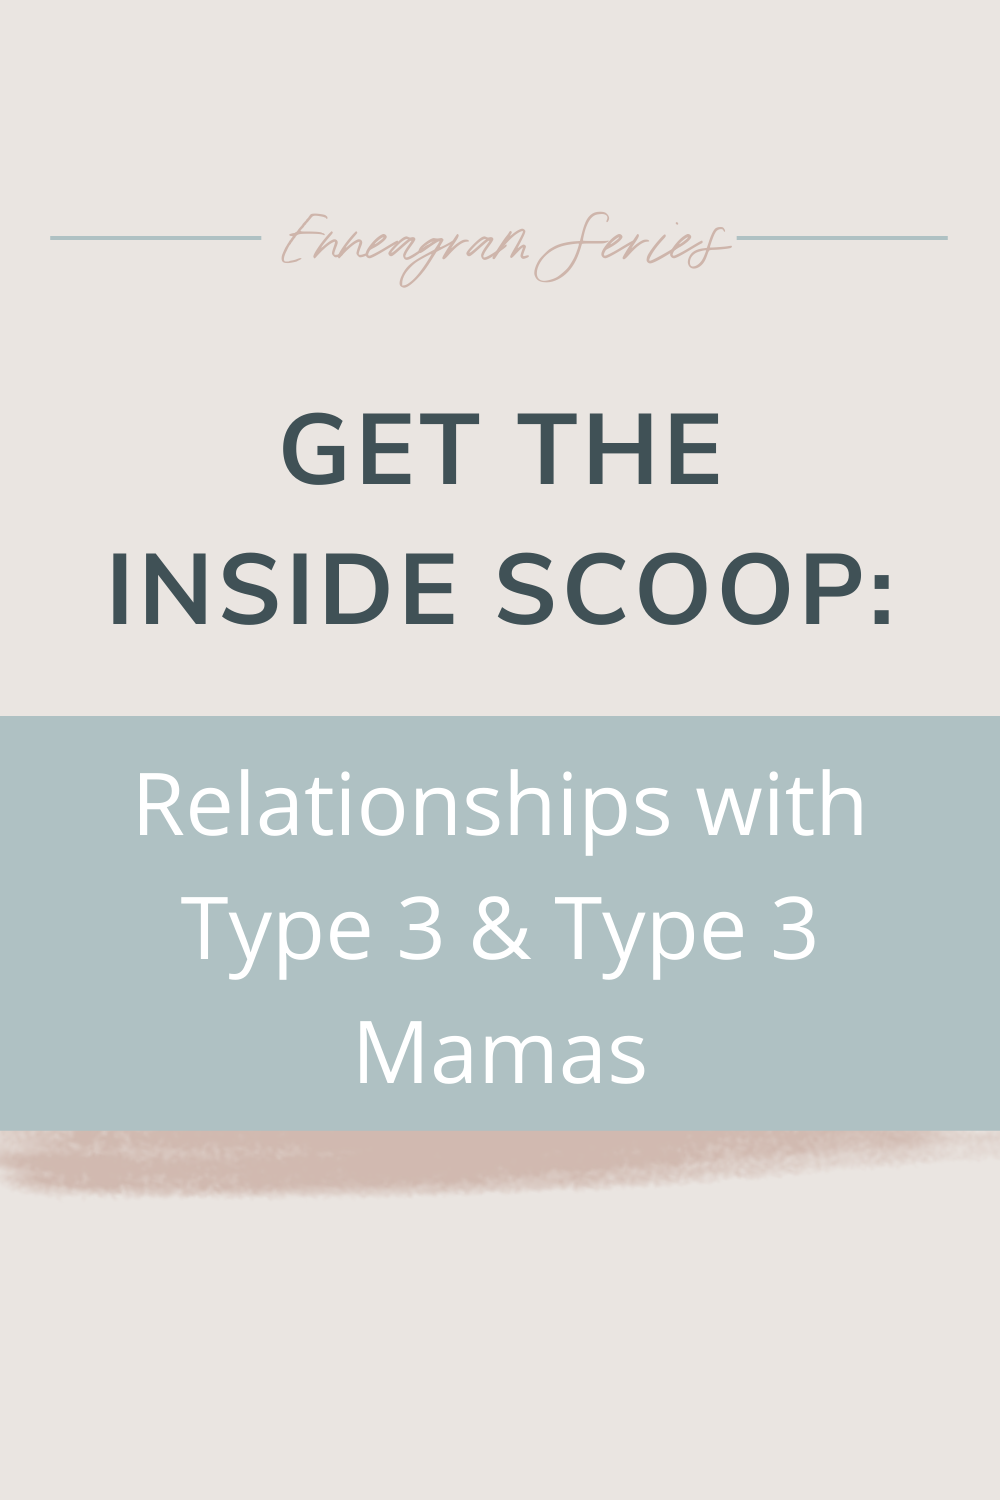 Get the Inside Scoop: Relationships with Type 3 and Type 3 Mamas! | Ever wondered what it's like to be partnered to an Enneagram Type Three? Curious how Type Three mamas take care of their little ones? Check out this blog to hear real responses from our community - some of these might resonate a little too much! Cheers!